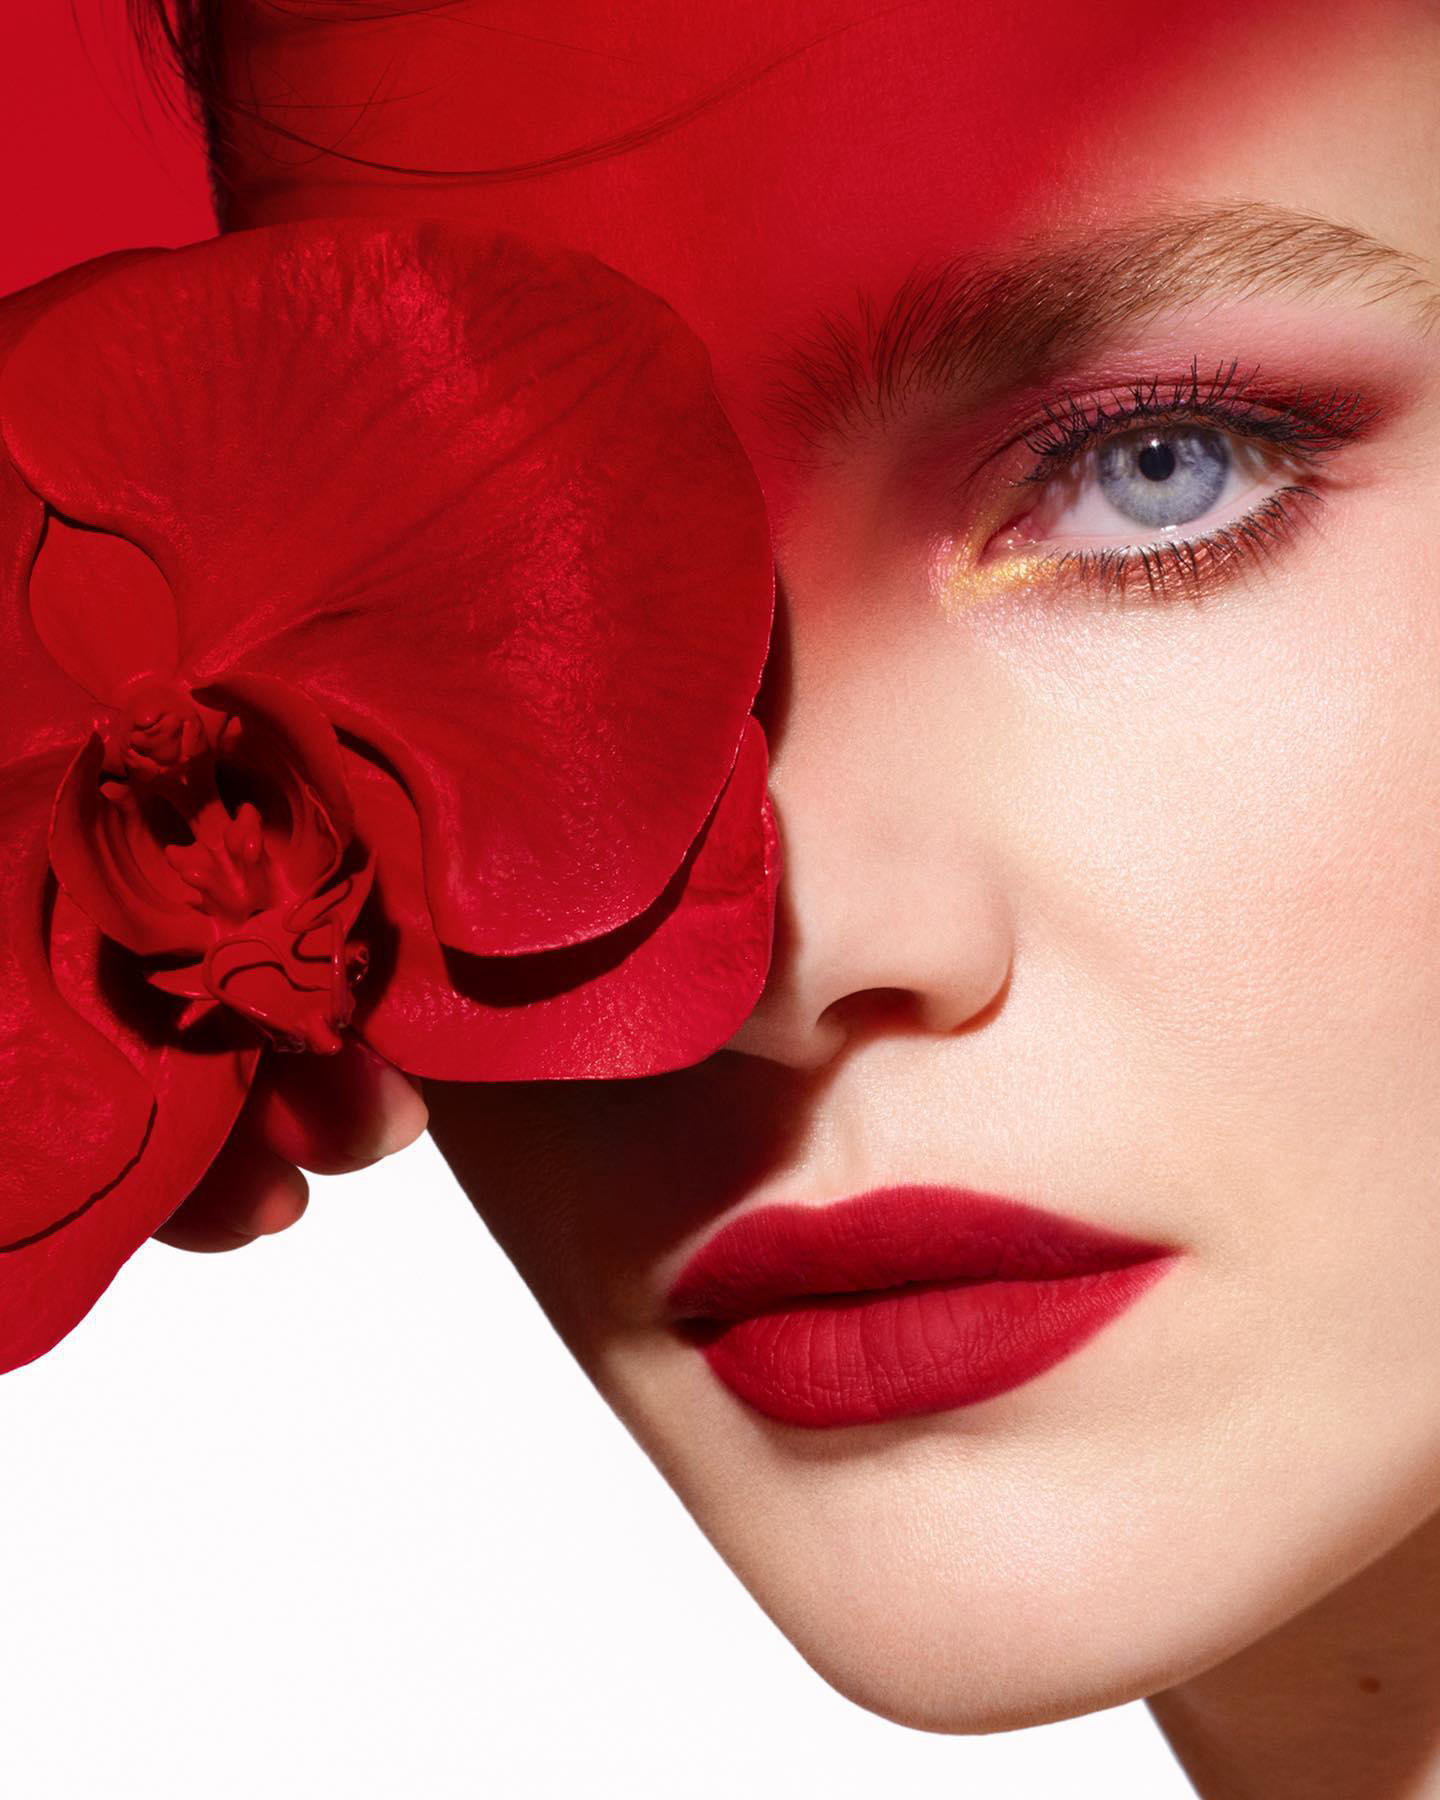 image  1 Guerlain - The muse of Guerlain's latest beauty collection, supermodel Natalia Vodianova blooms with